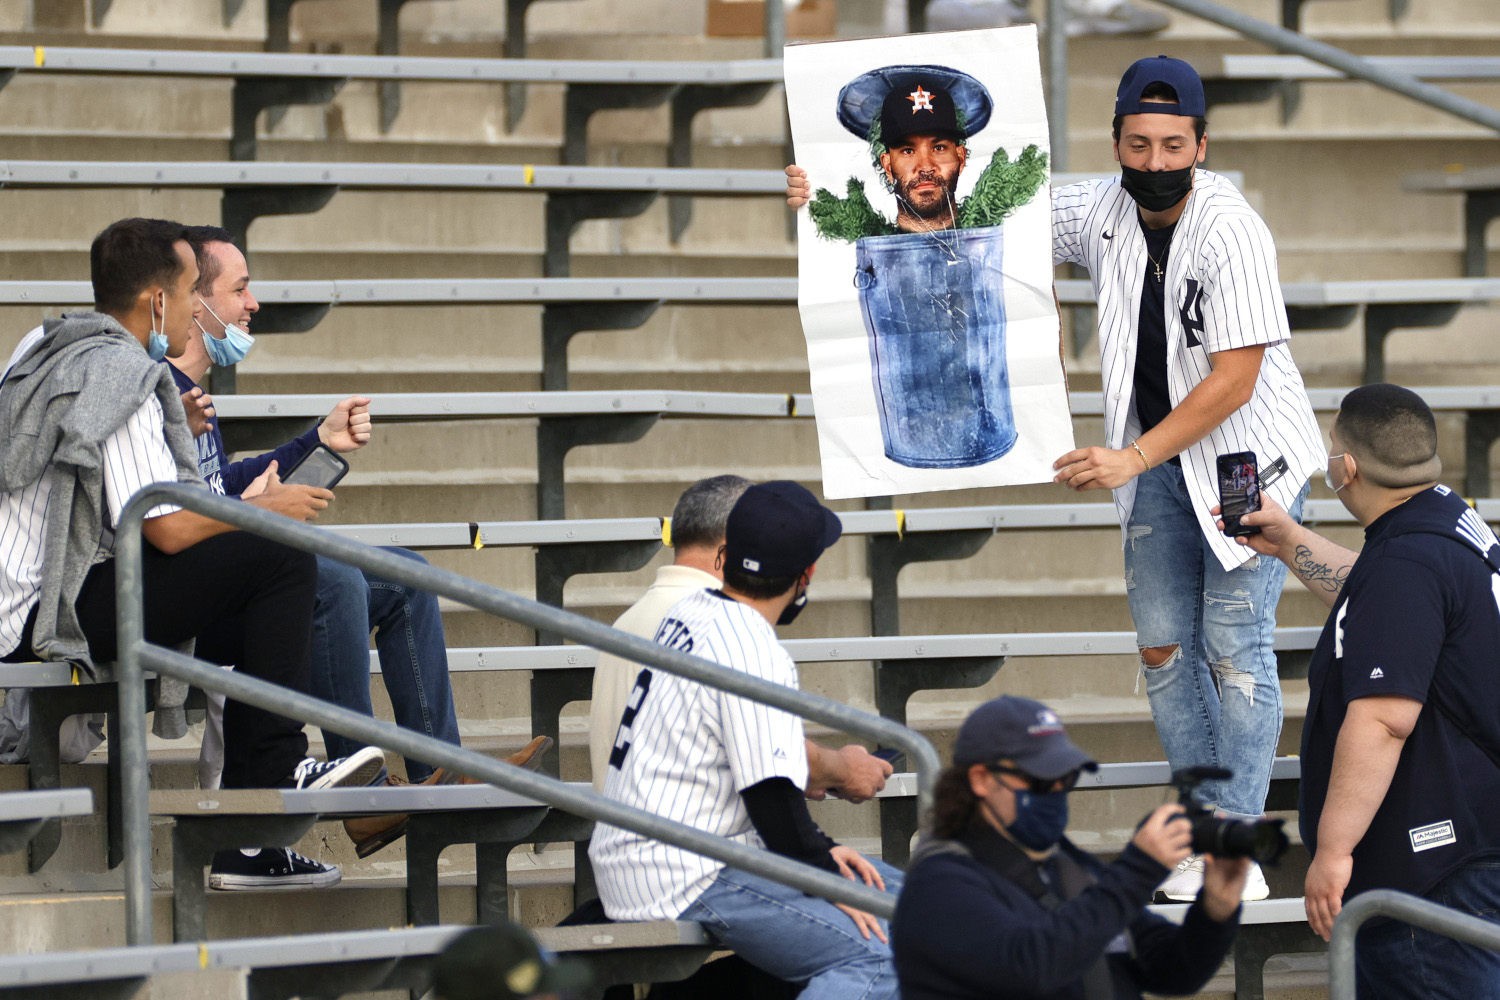 A fan at Yankee Stadium holds a sign referencing the Houston Astros sign-stealing scandal